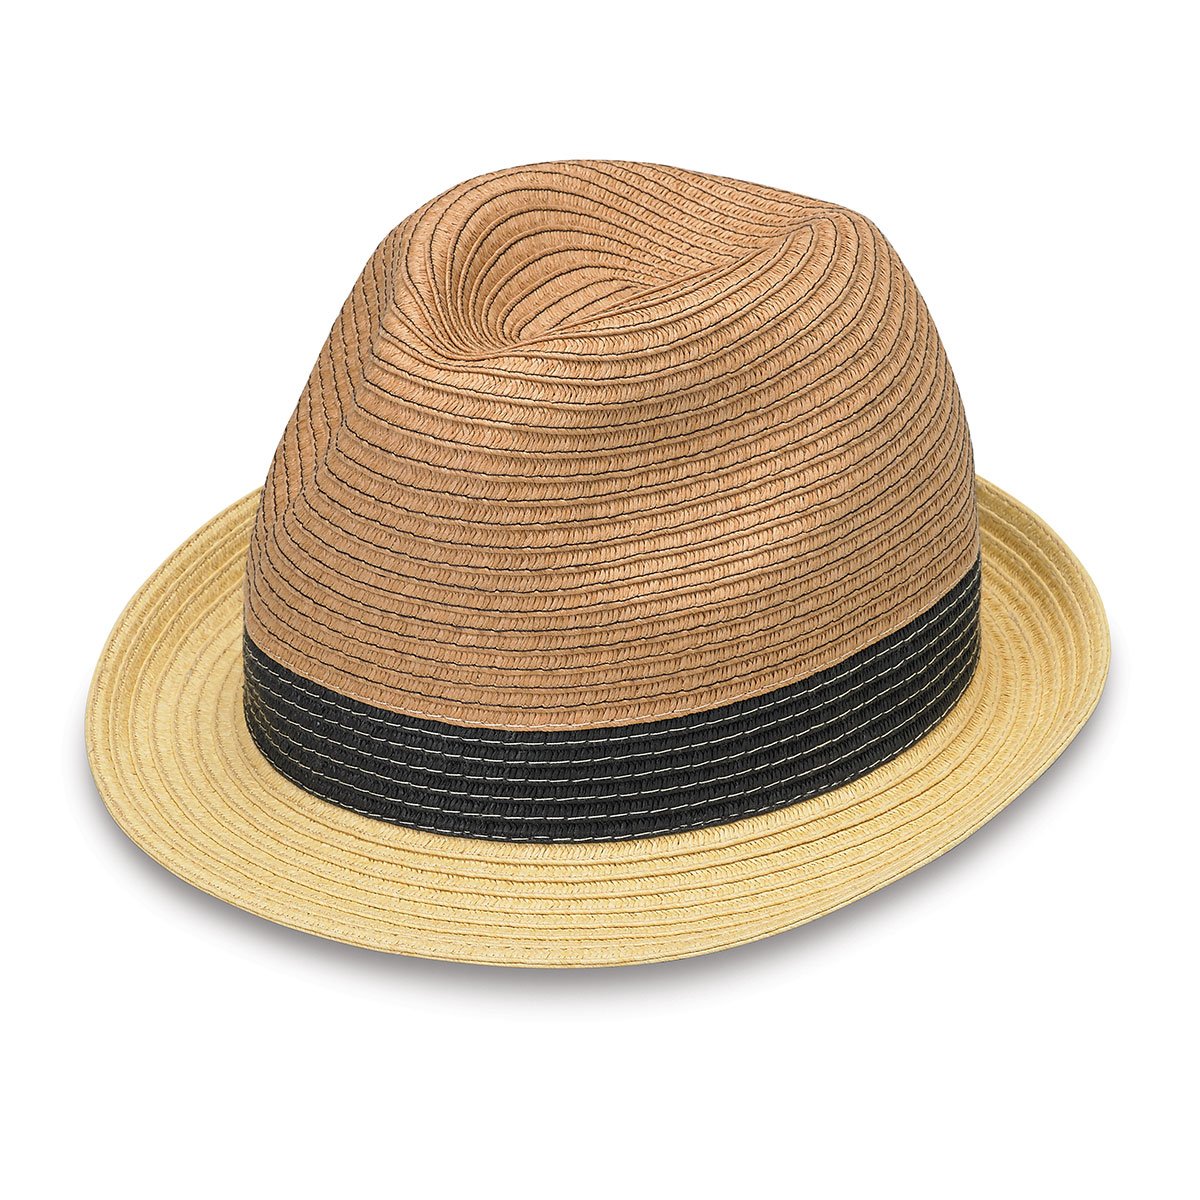 Featuring St. Tropez Trilby Paper Braid Sun Hat in Natural Combo from Wallaroo